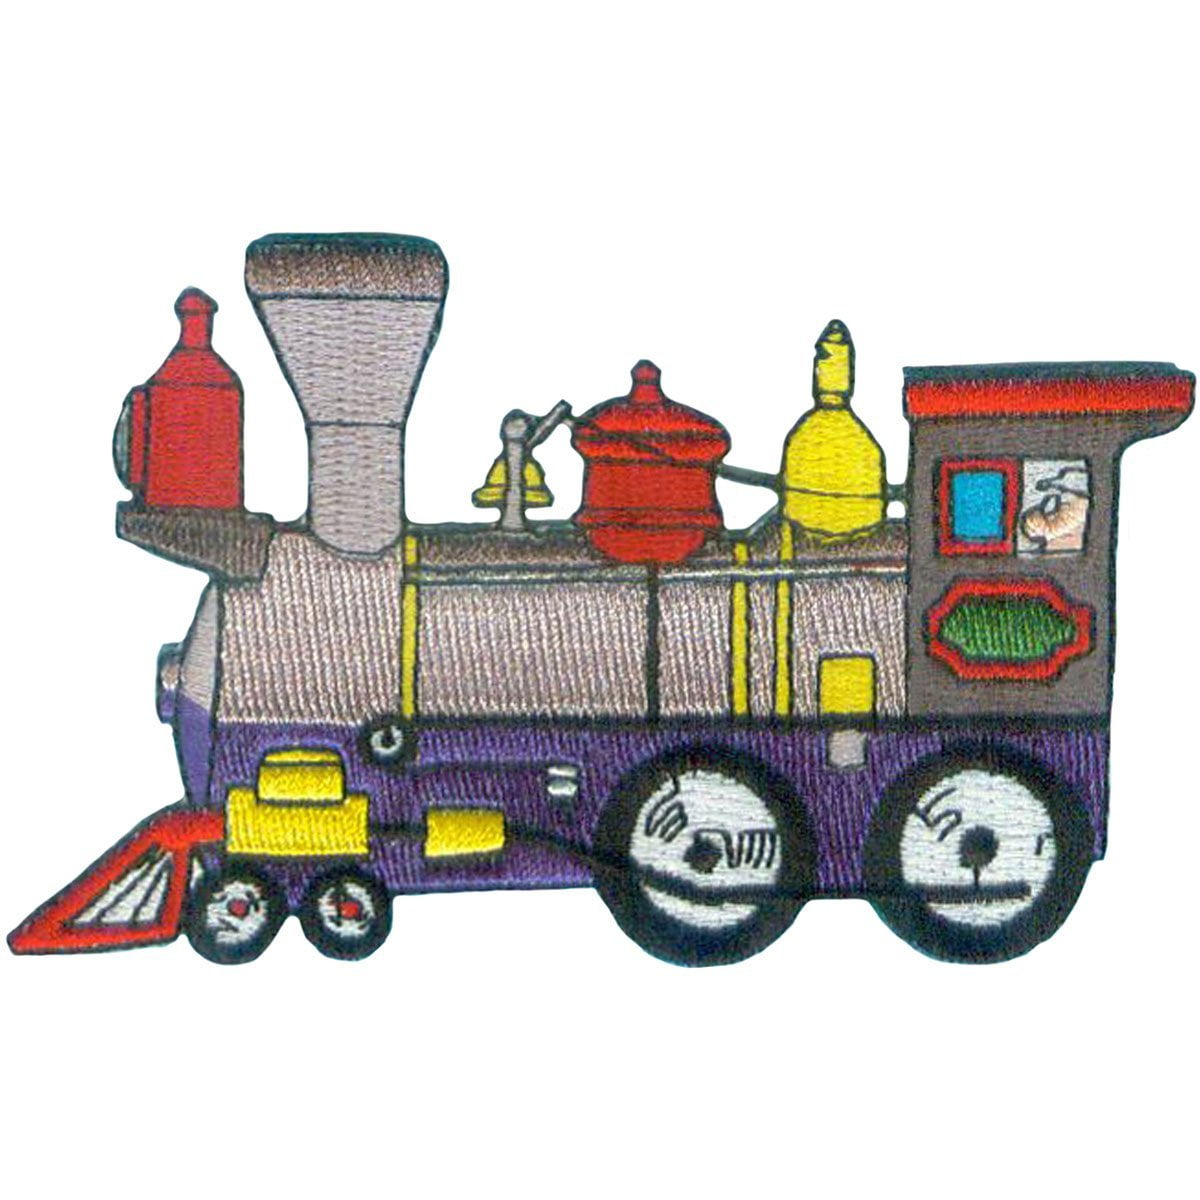 Thomas the Tank Engine Kids  Iron sew on Patch clothes dressmaking applique